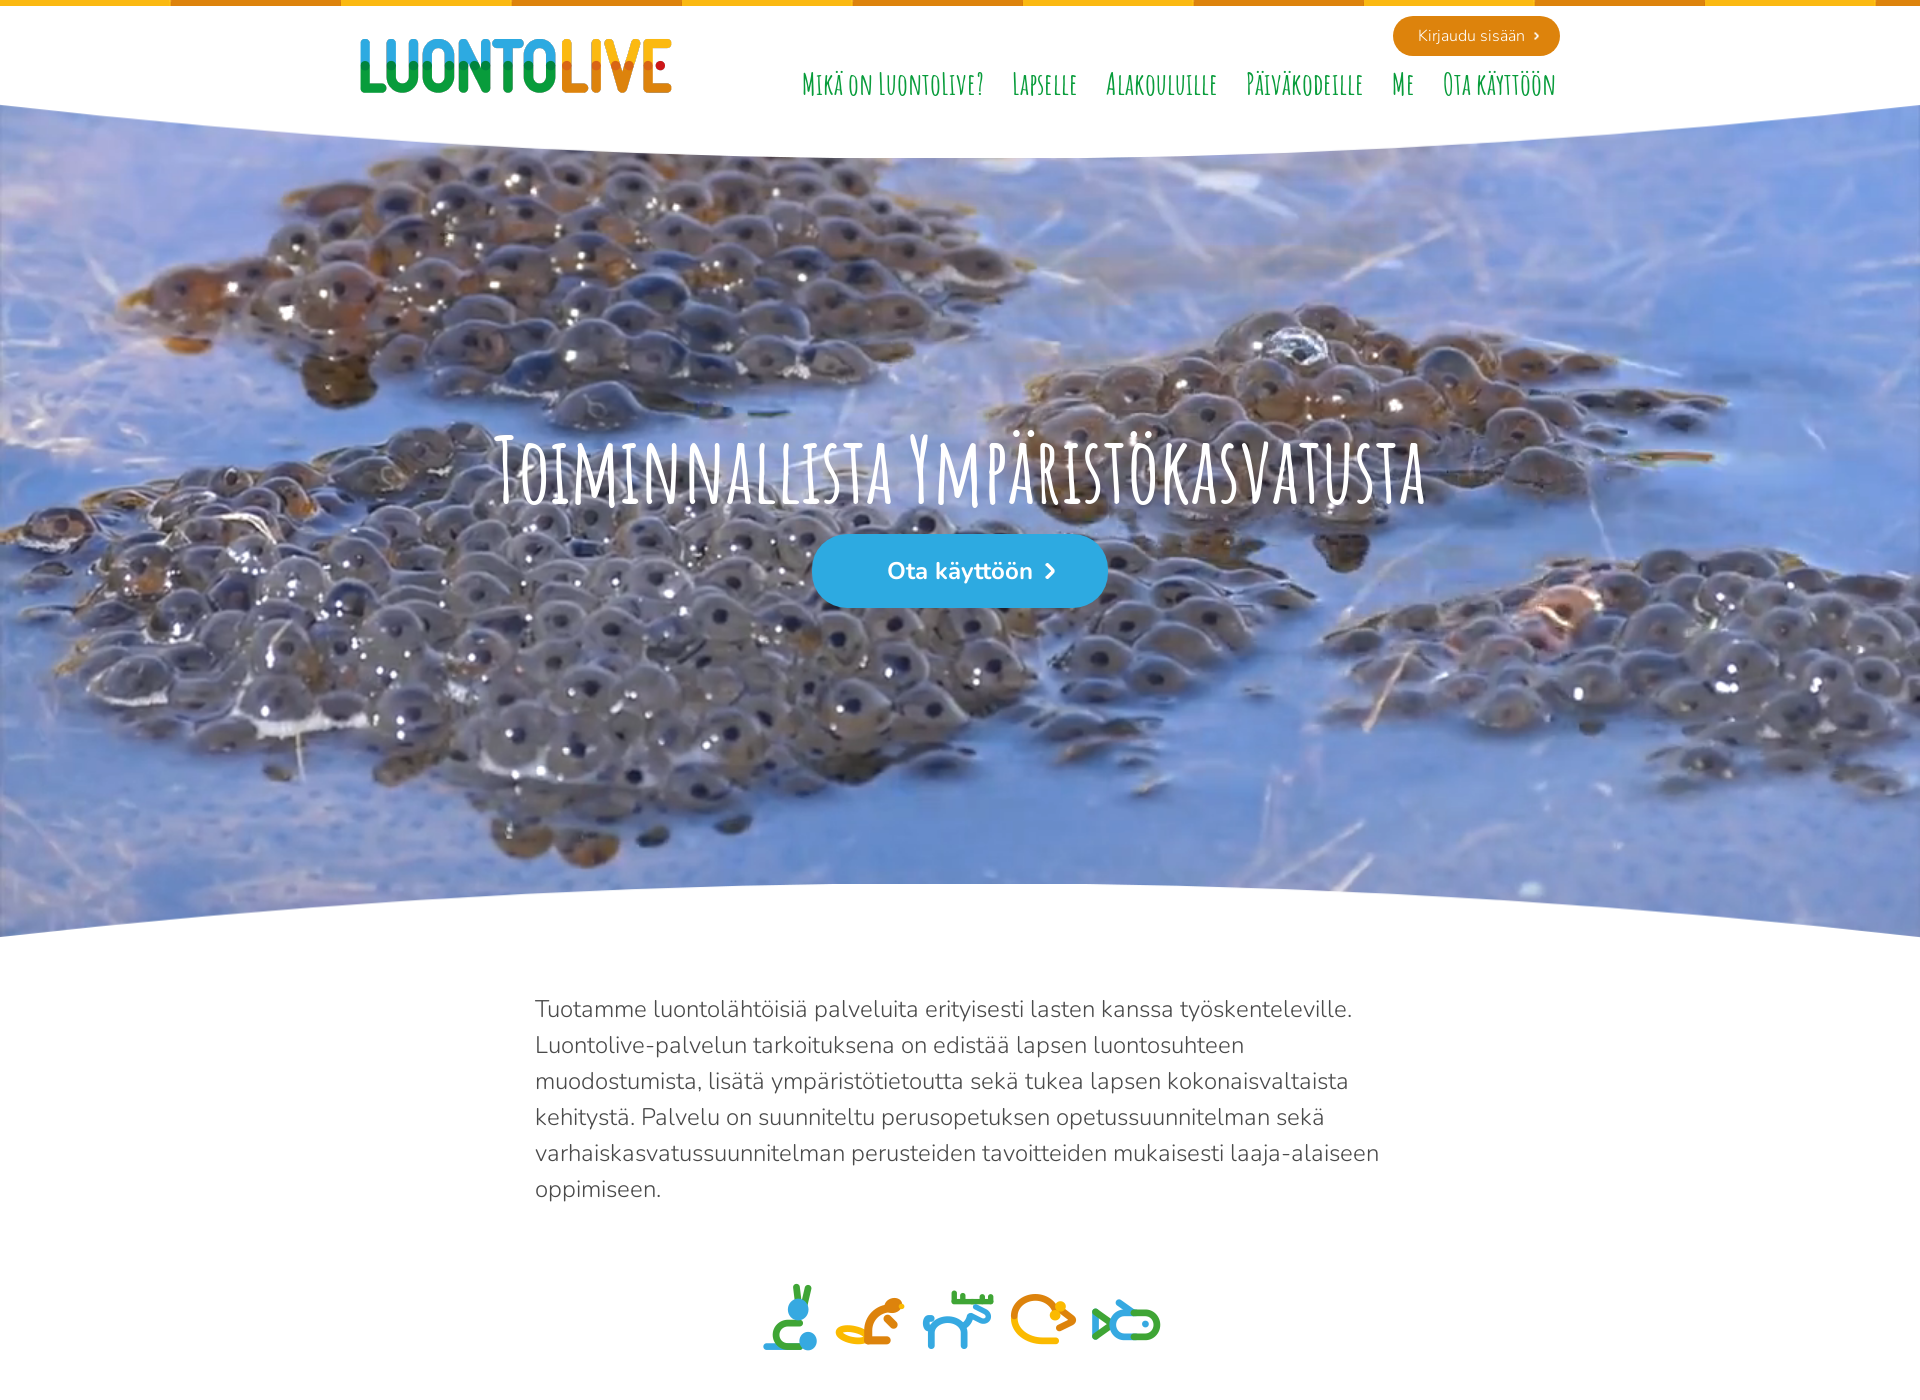 Screenshot for luontolive.fi